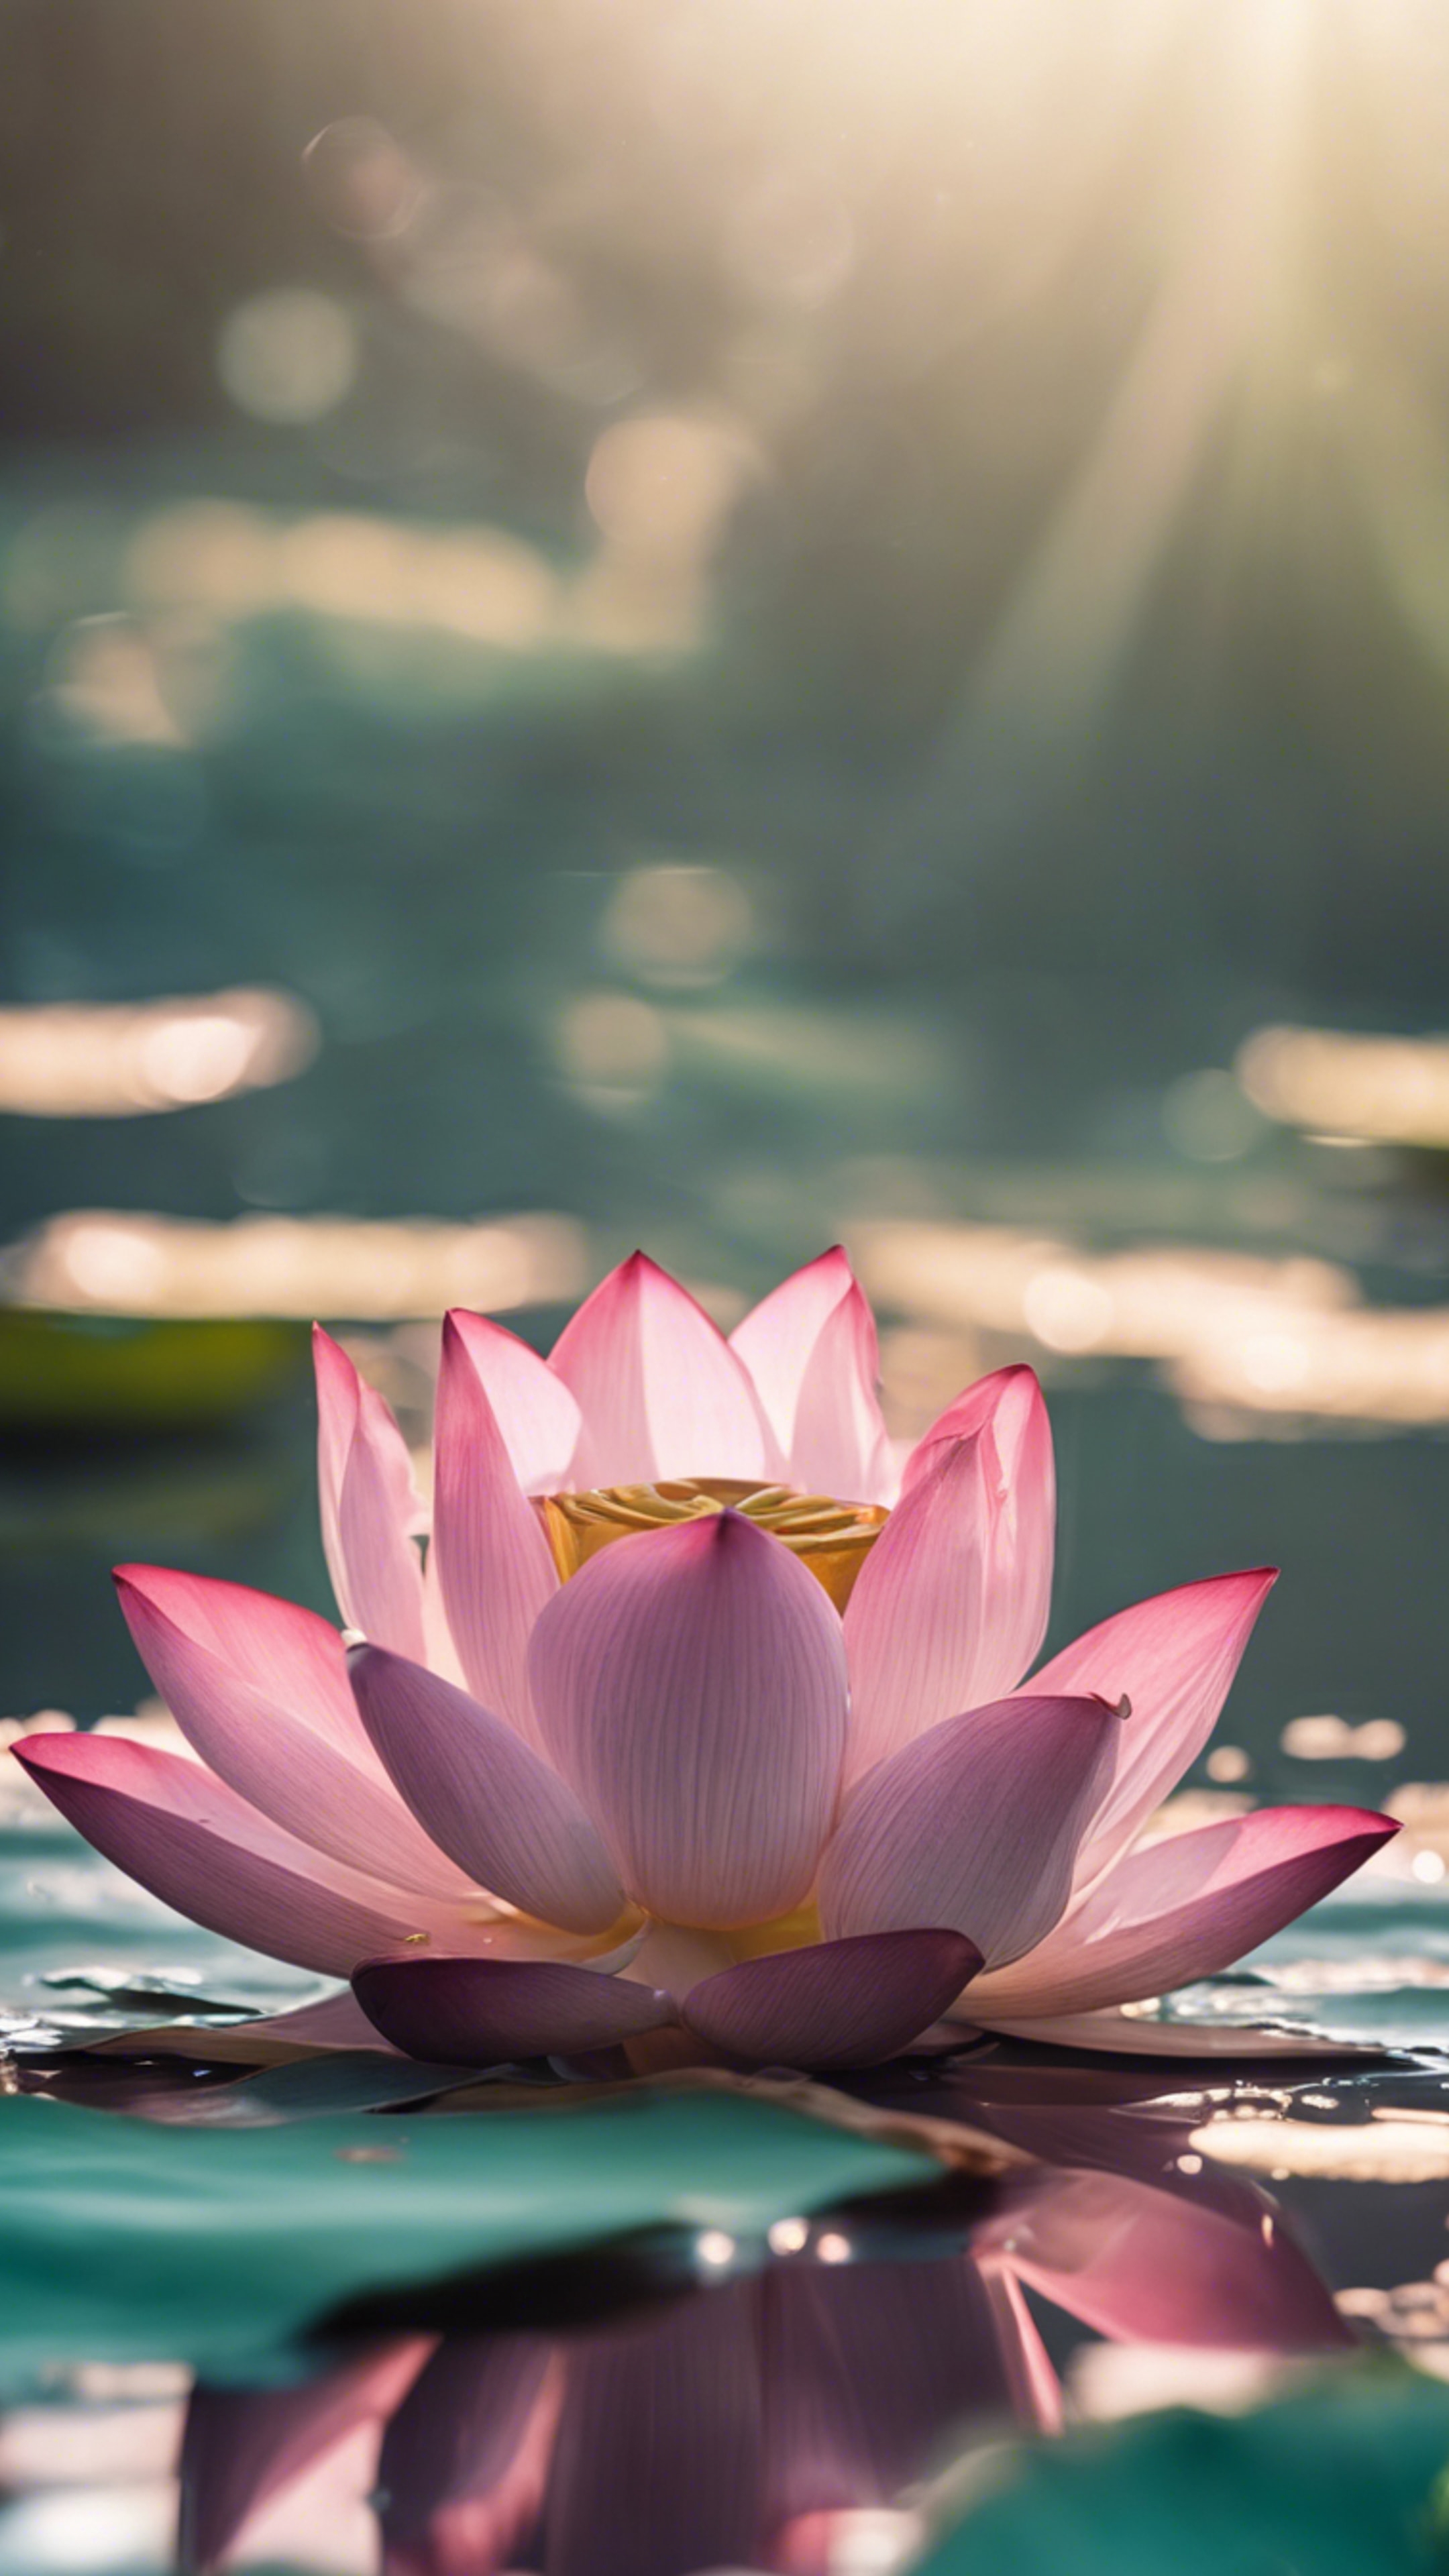 A close-up image of a single blooming lotus on a clear pond.壁紙[056d411e4bd14d9f8d69]